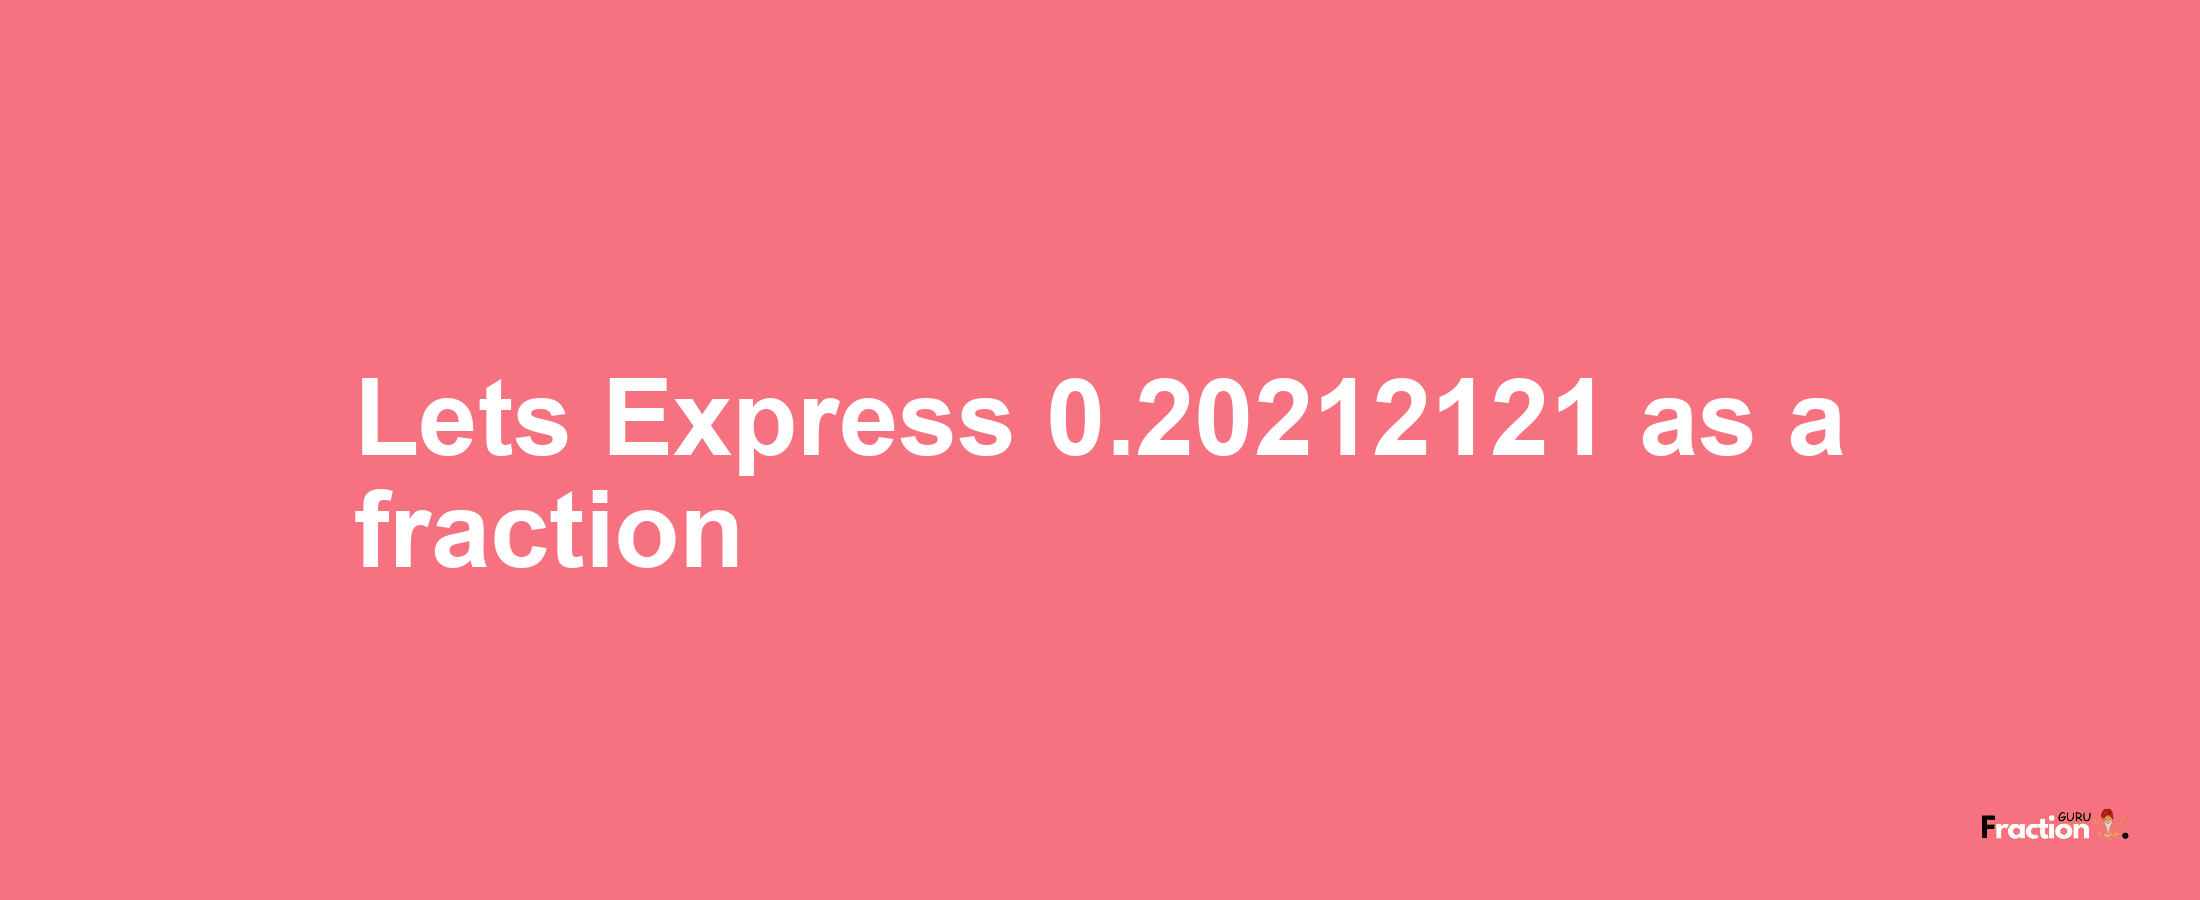 Lets Express 0.20212121 as afraction